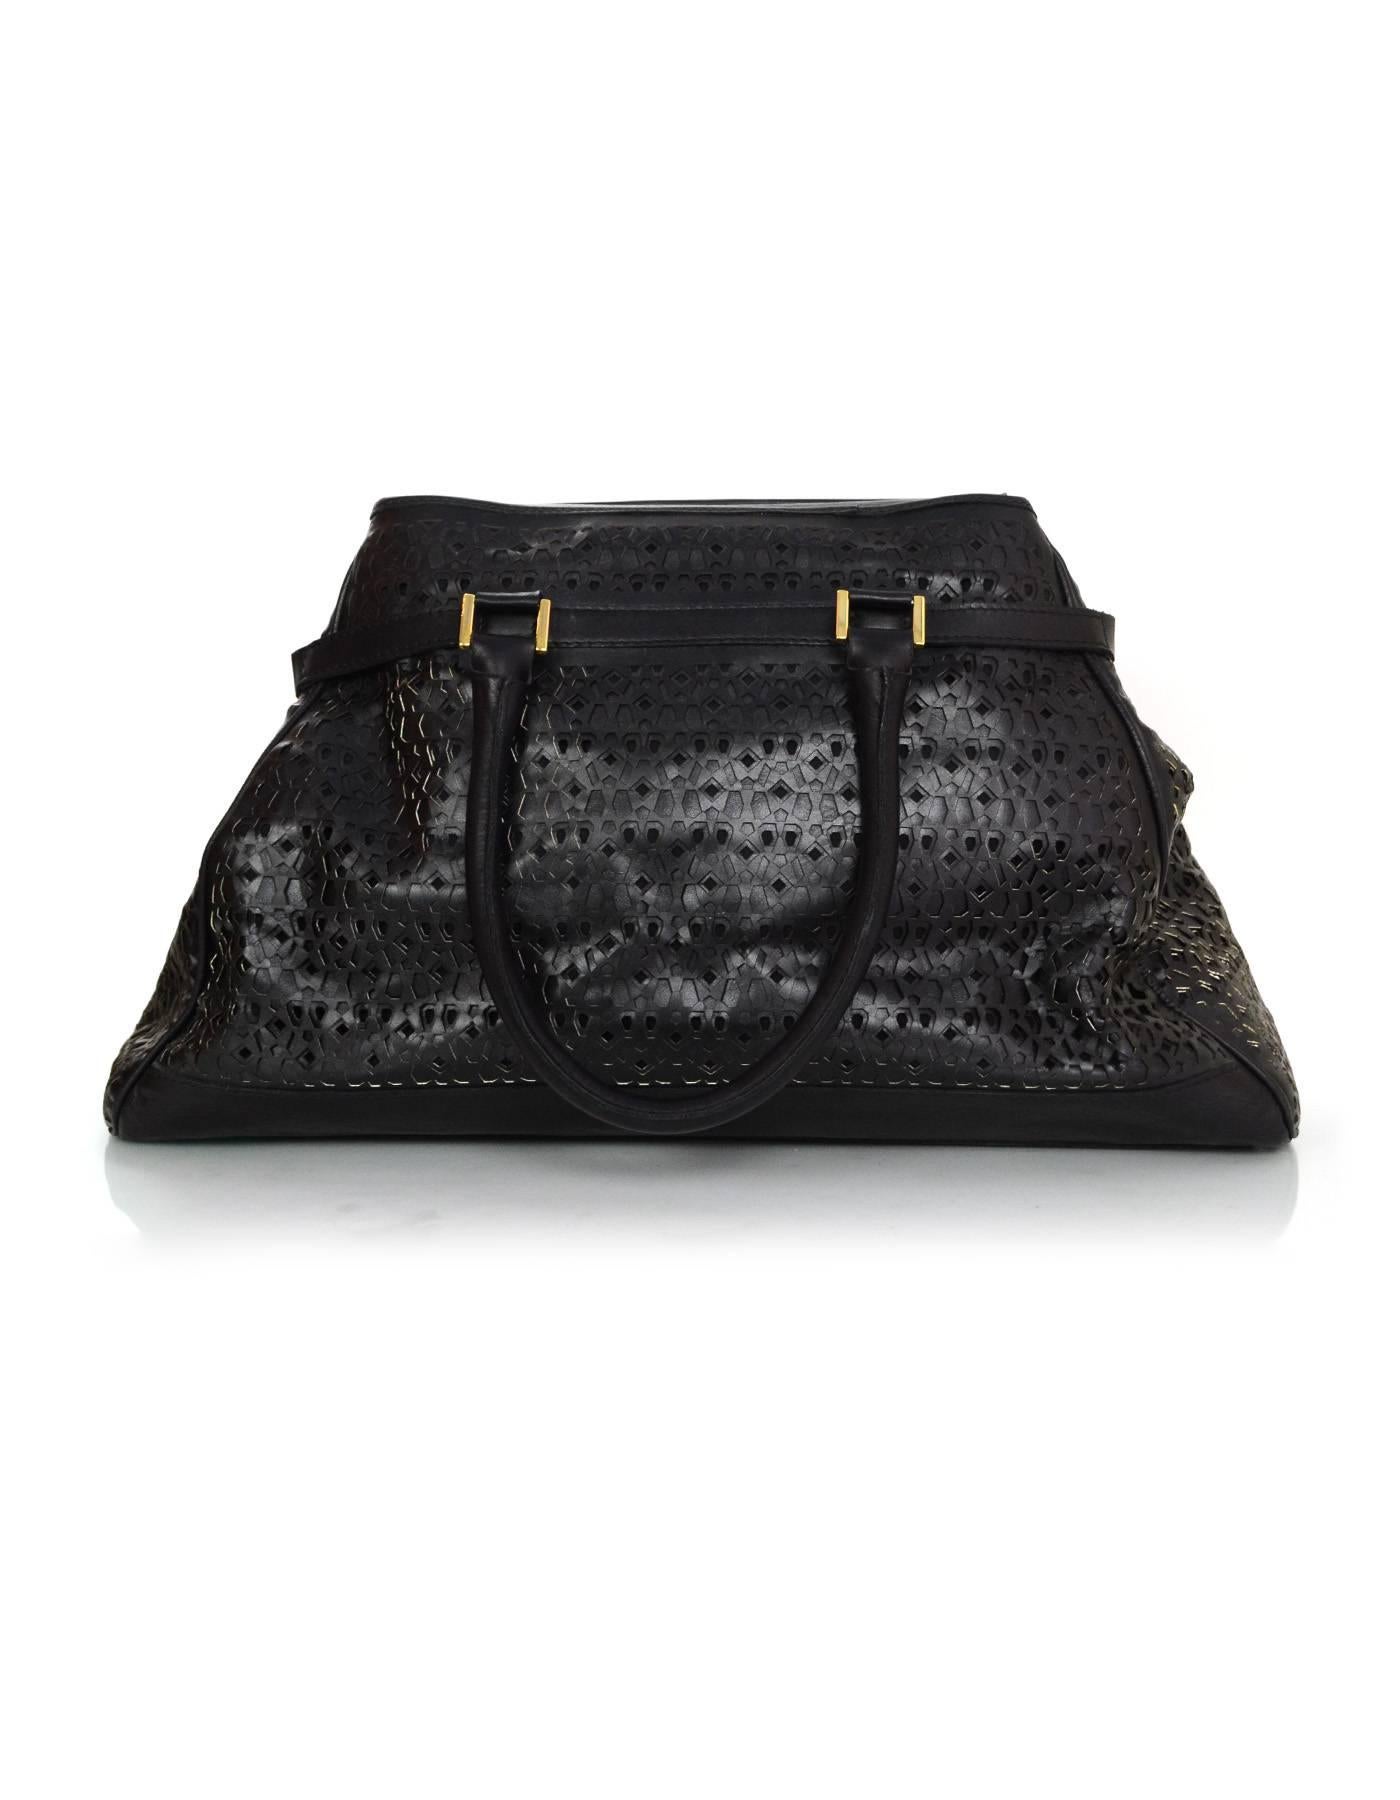 Gianfranco Ferre Black Laser Cut Leather Tote

Color: Black
Hardware: Goldtone
Materials: Leather
Lining: Black canvas
Closure/Opening: Flap top with magnetic snap closure
Exterior Pockets: One front flap pocket
Interior Pockets: One zipper